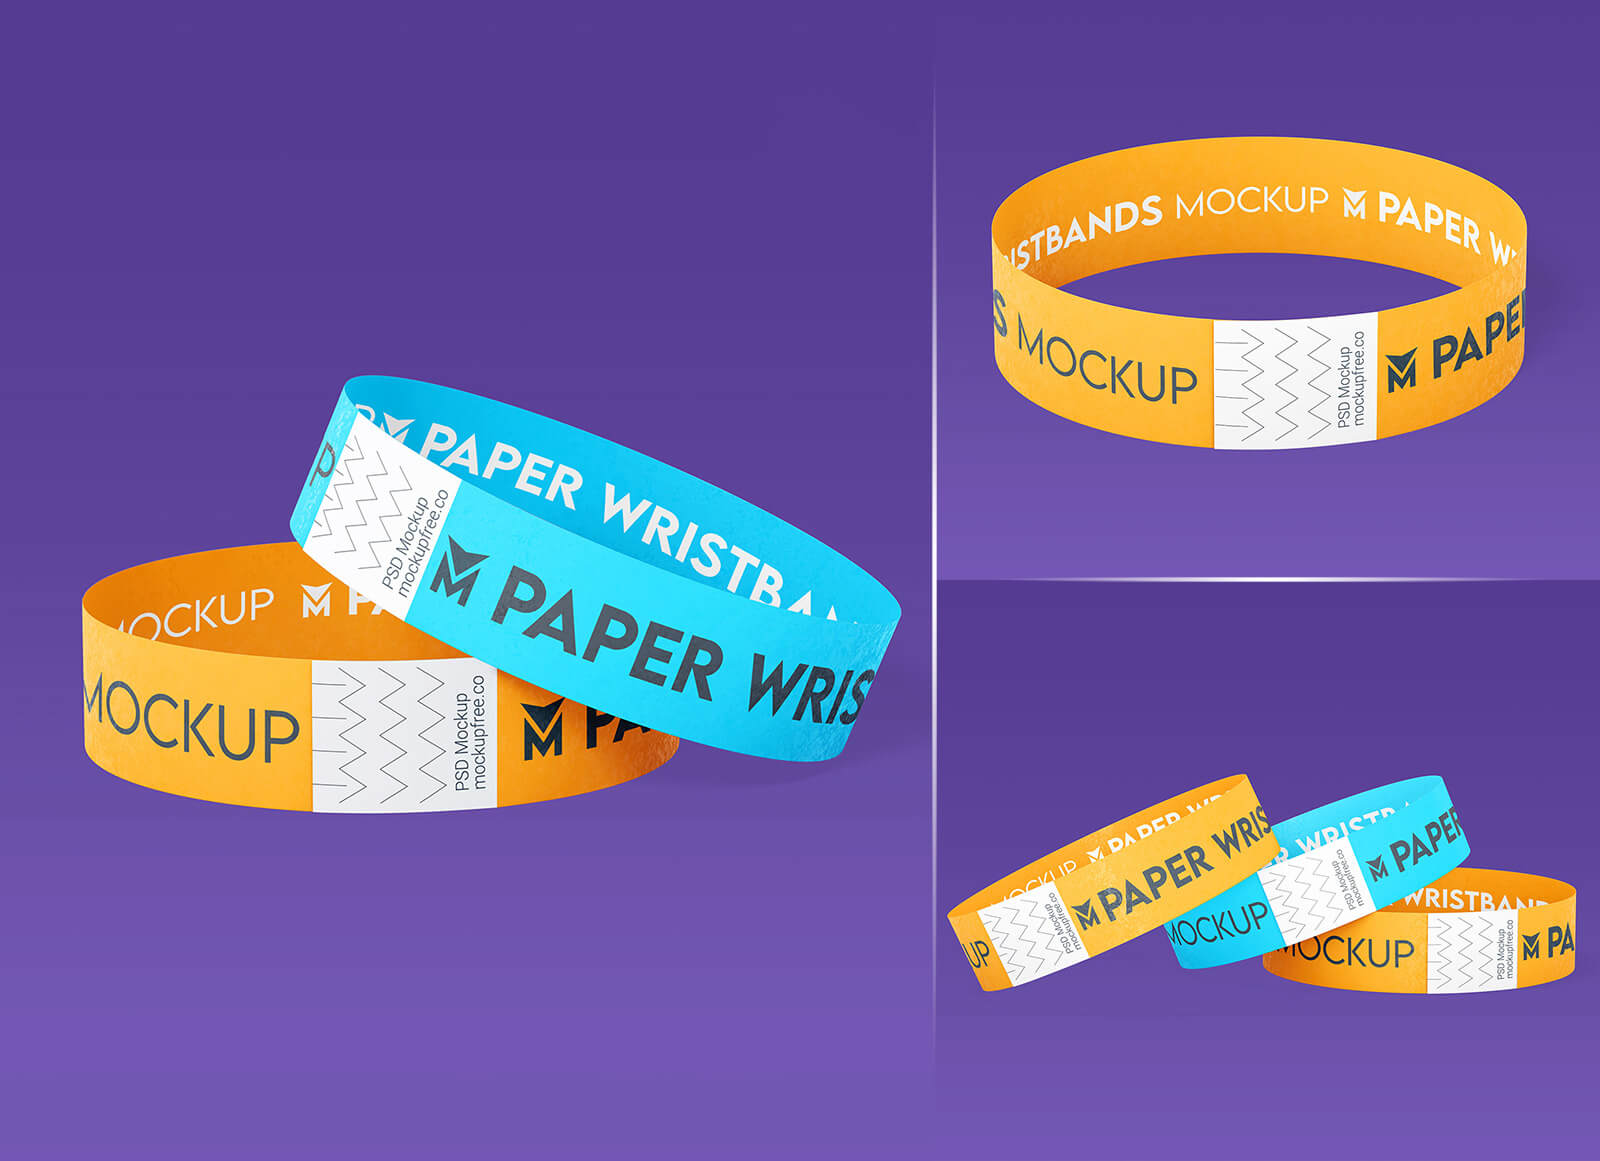 Free Paper Wrist Band Mockup PSD Template| Exclusive